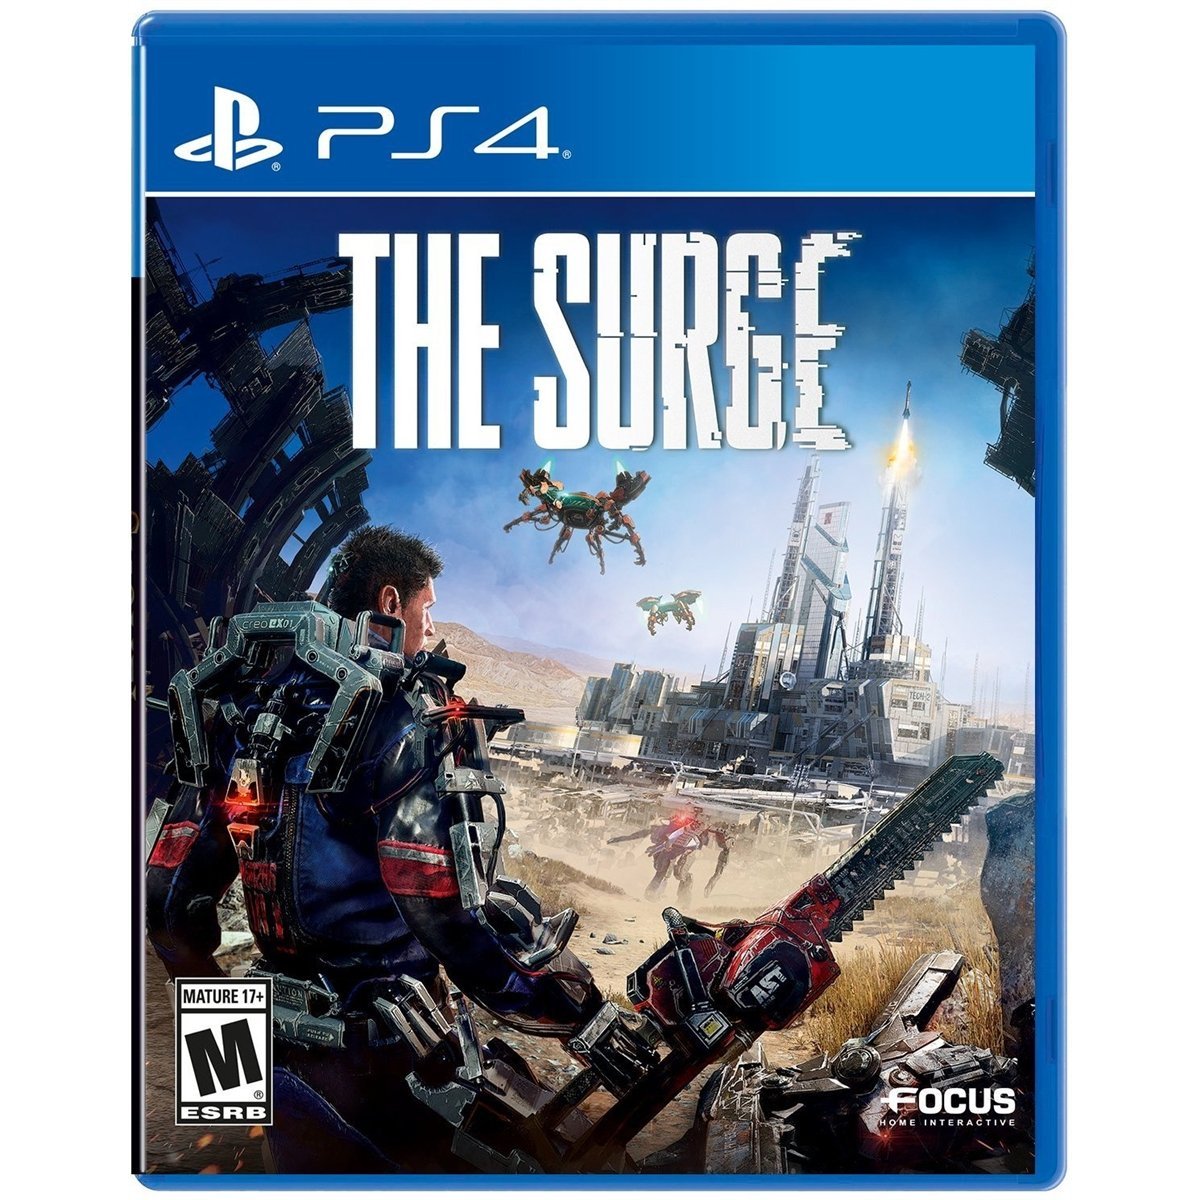 THE SURGE PS4